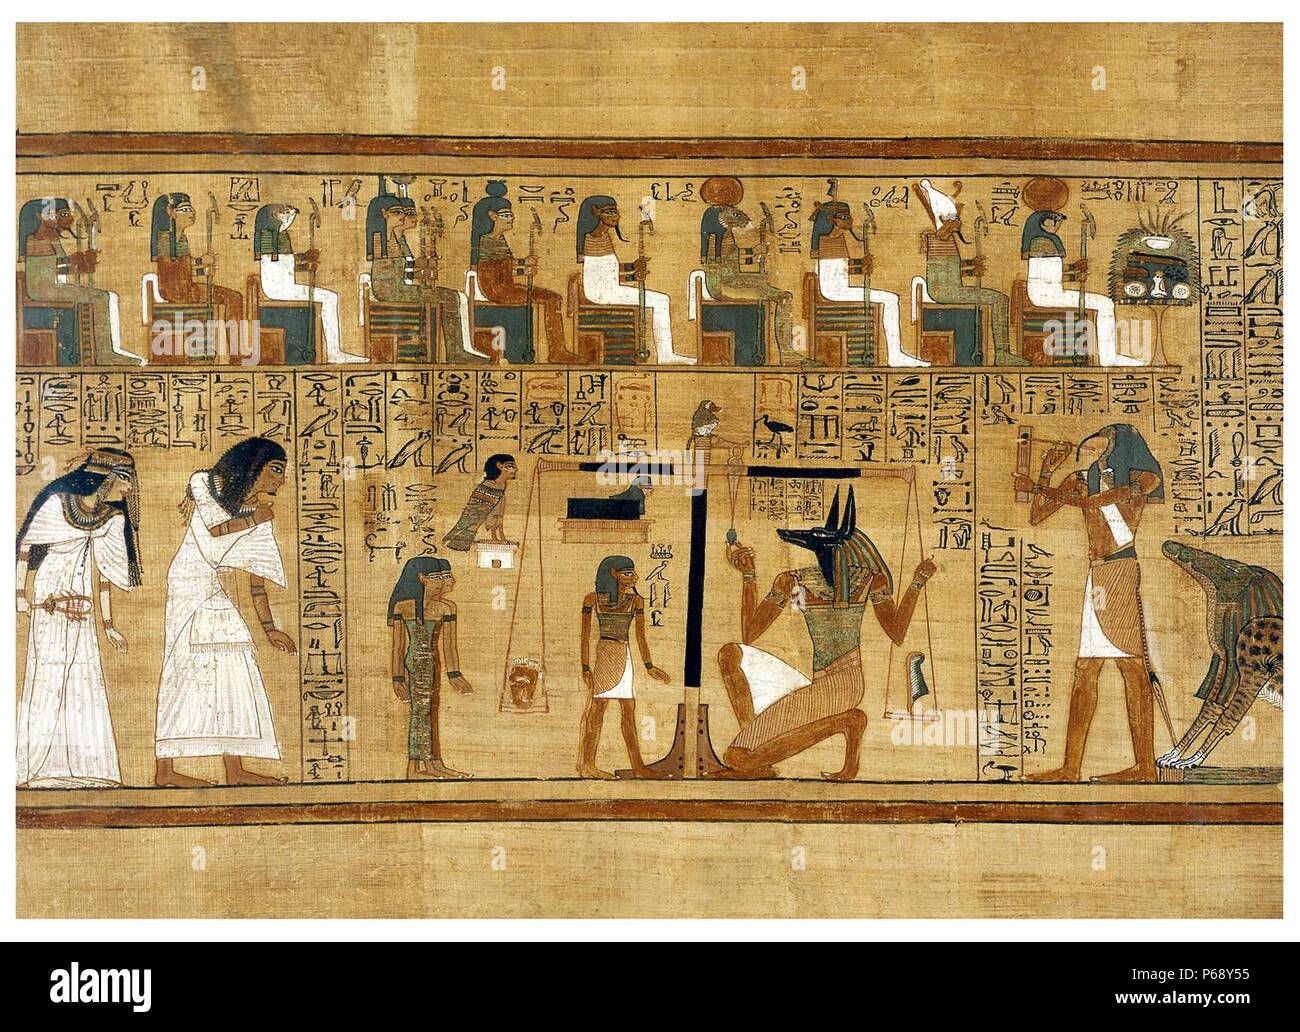 Papyrus from the Book of the Dead illustrating weighing of the heart, Thebes, Egypt. Dated 1275 B.C. Stock Photo